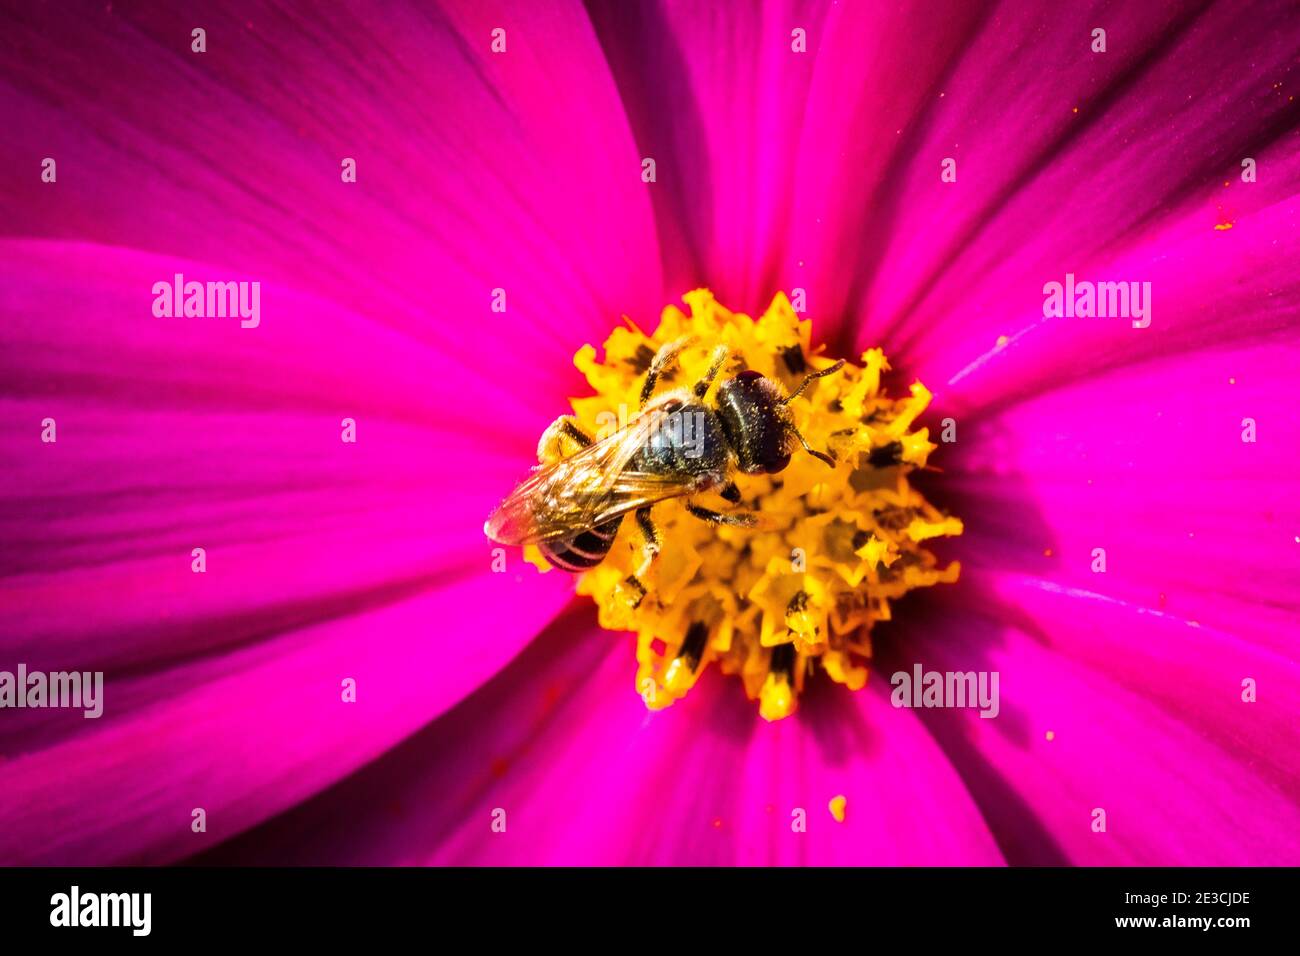 A brilliant magenta flower has attracted a small bee to its pollen laden center.  Shot with a macro lens. Stock Photo